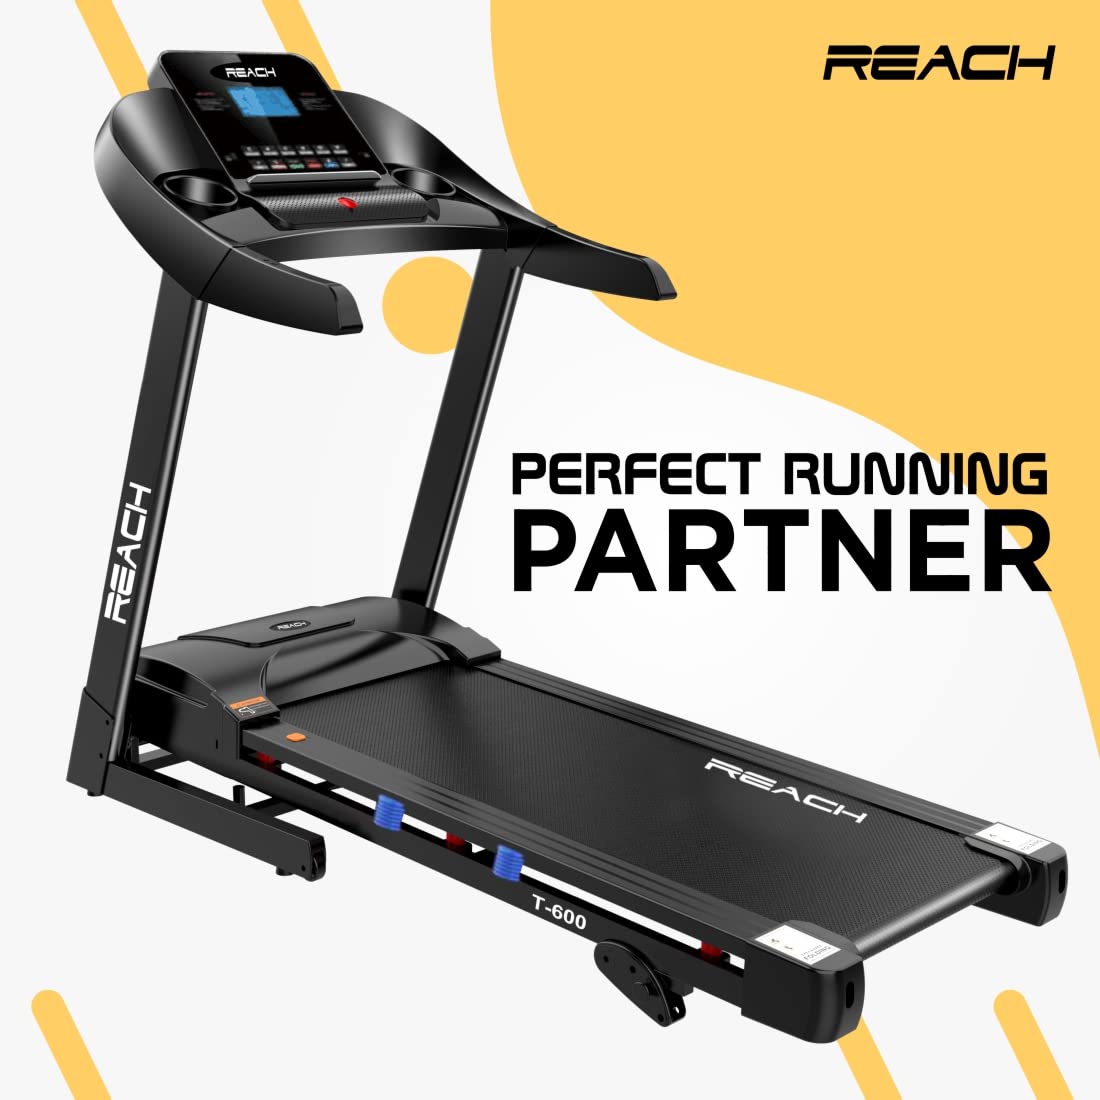 Reach T-600 Motorized Treadmill | Foldable Machine with Bluetooth for Home Fitness & Gym Equipment | For Running, Jogging, Cardio & Weight Loss | LCD display with 12 Preset Programs | 14 km/hr Max User Weight 130 Kgs